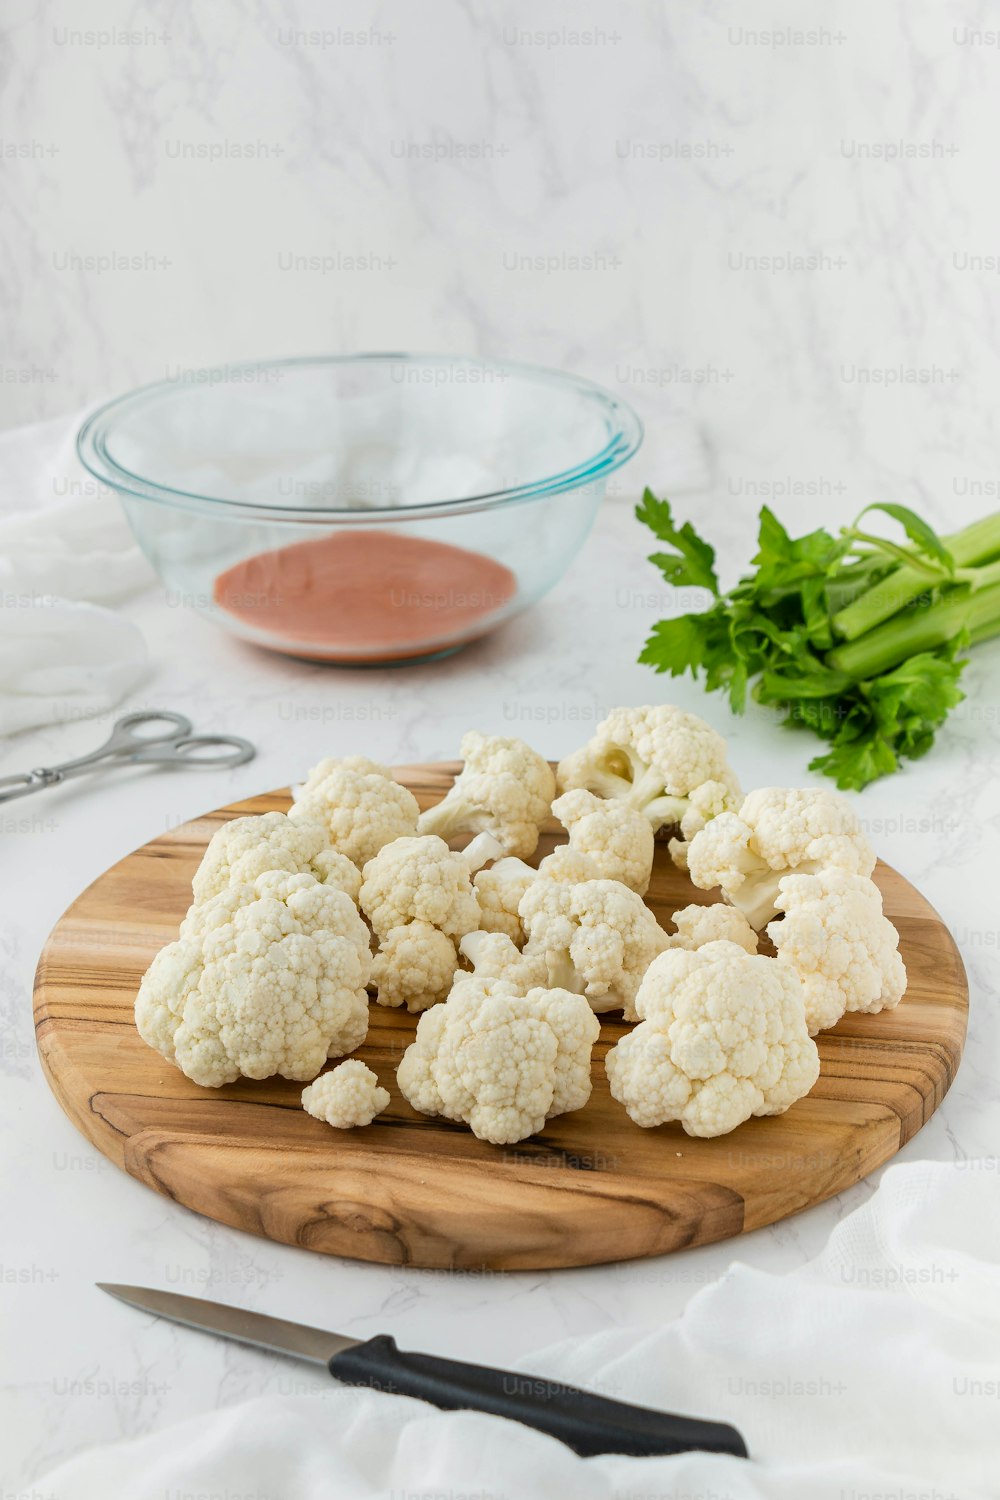 cauliflower on a cutting board next to a bowl of sauce